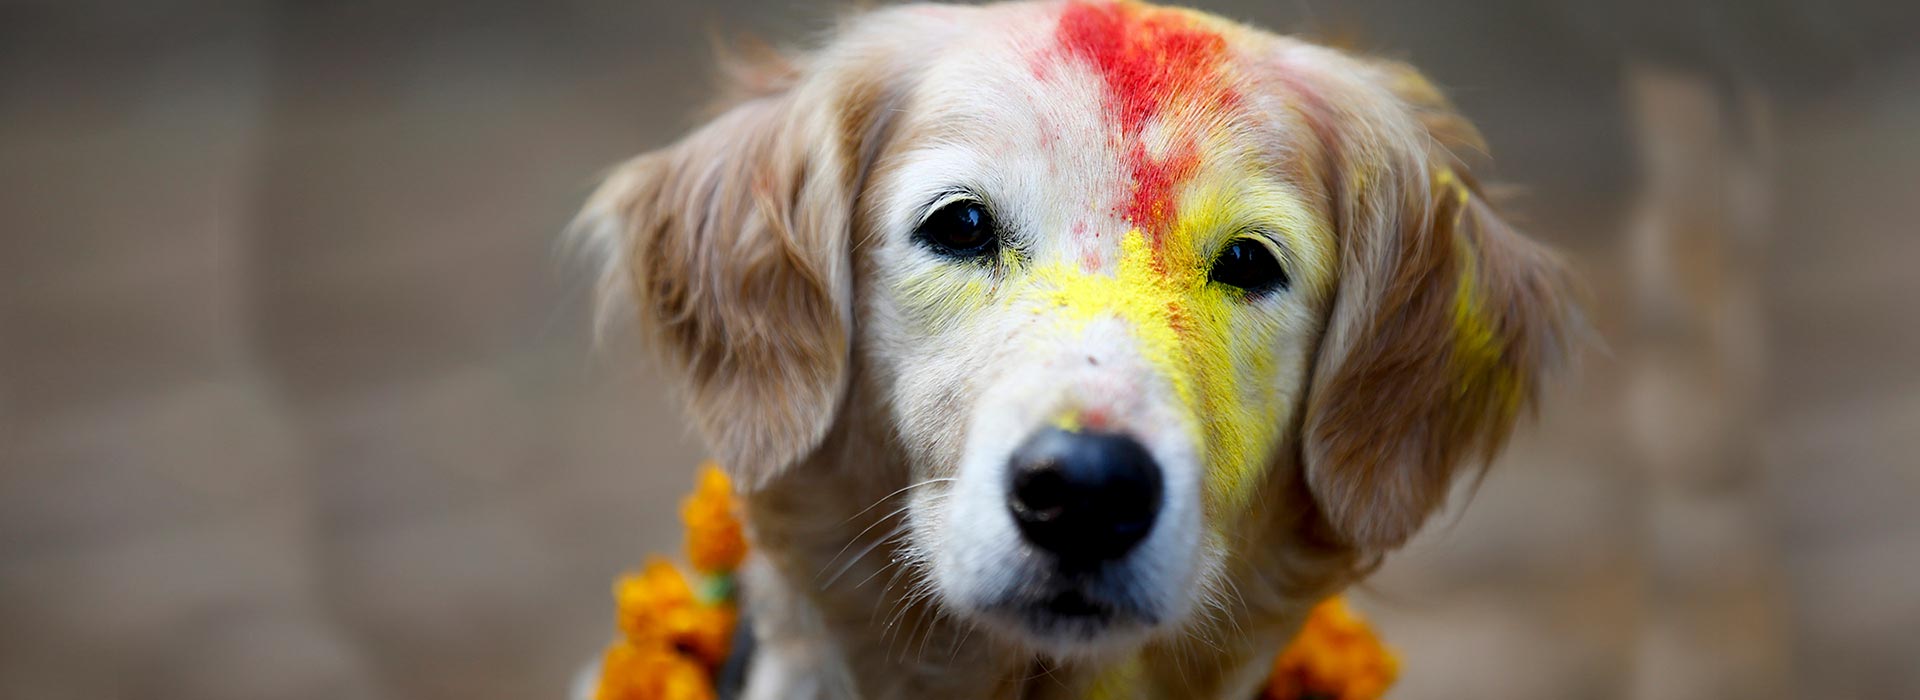 Tihar Festival - Worshiping the dogs